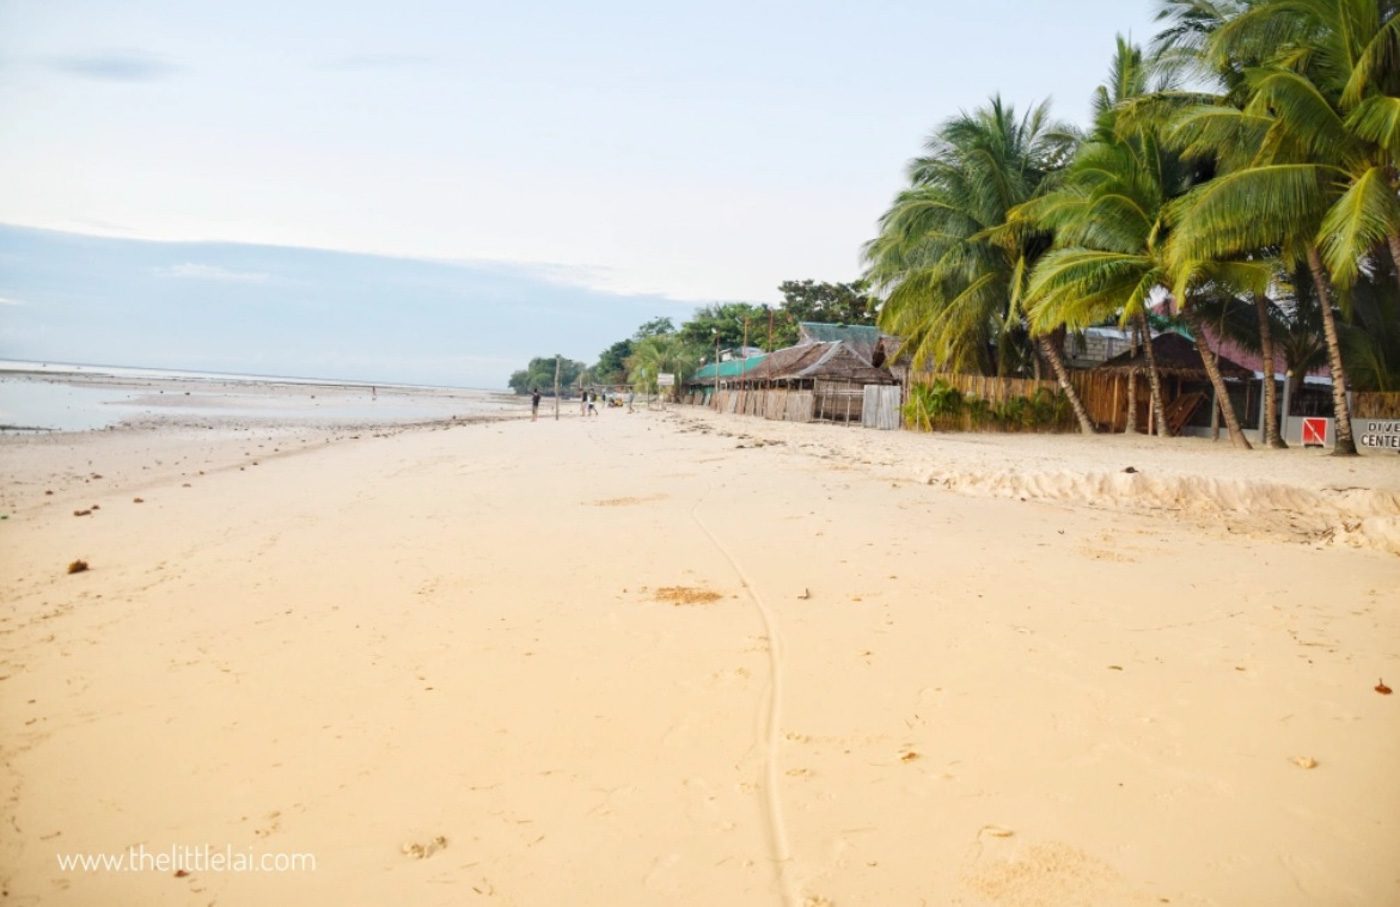 BAREFOOT-FRIENDLY. Quinale Beach is a powdery beach in Anda great for barefoot walking. Photo by LaiAriel Reyes Samangka 